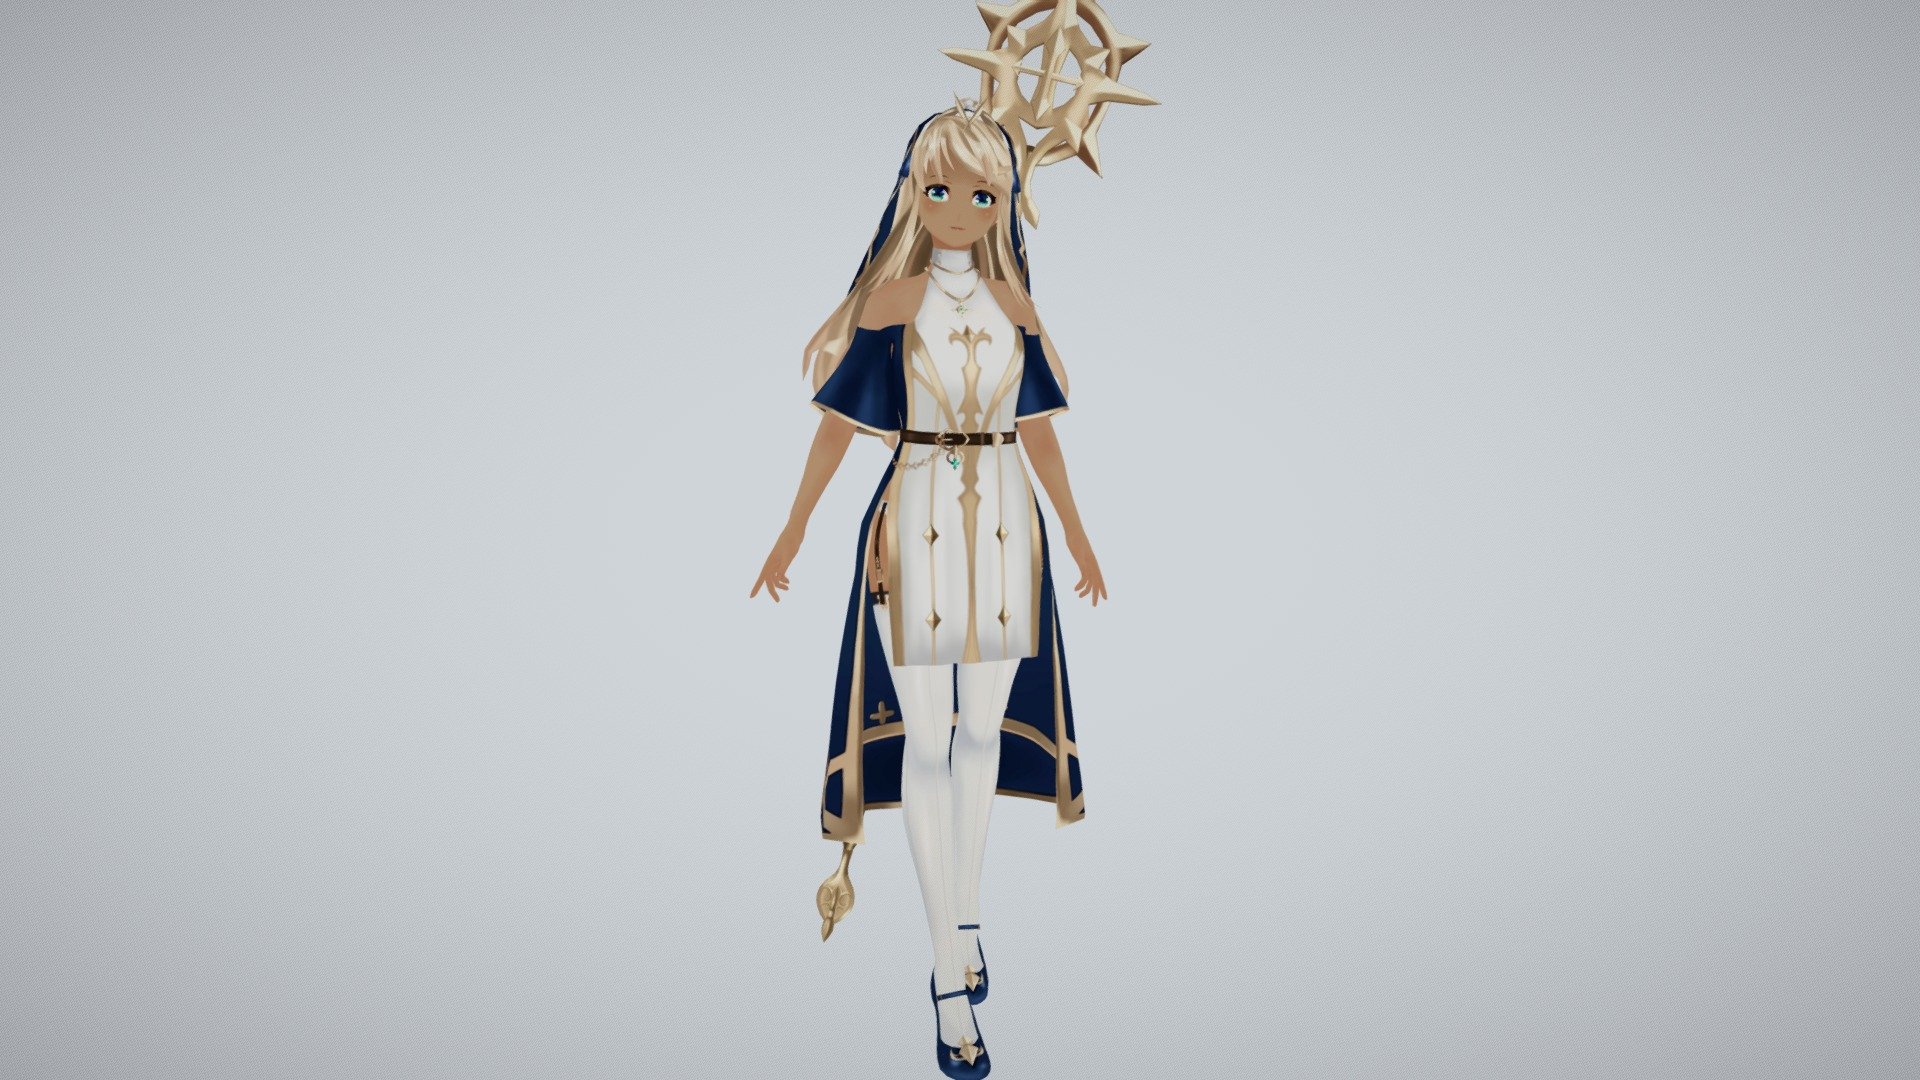 Low poly 3D model of the game Anime Girl Cleric PBR texture (Albedo) 

VIDEO PREVIEW https://www.youtube.com/watch?v=2RTI9yQKcNo! - Anime Girl Cleric - 3D model by Inari3D (@Inari_Green) 3d model